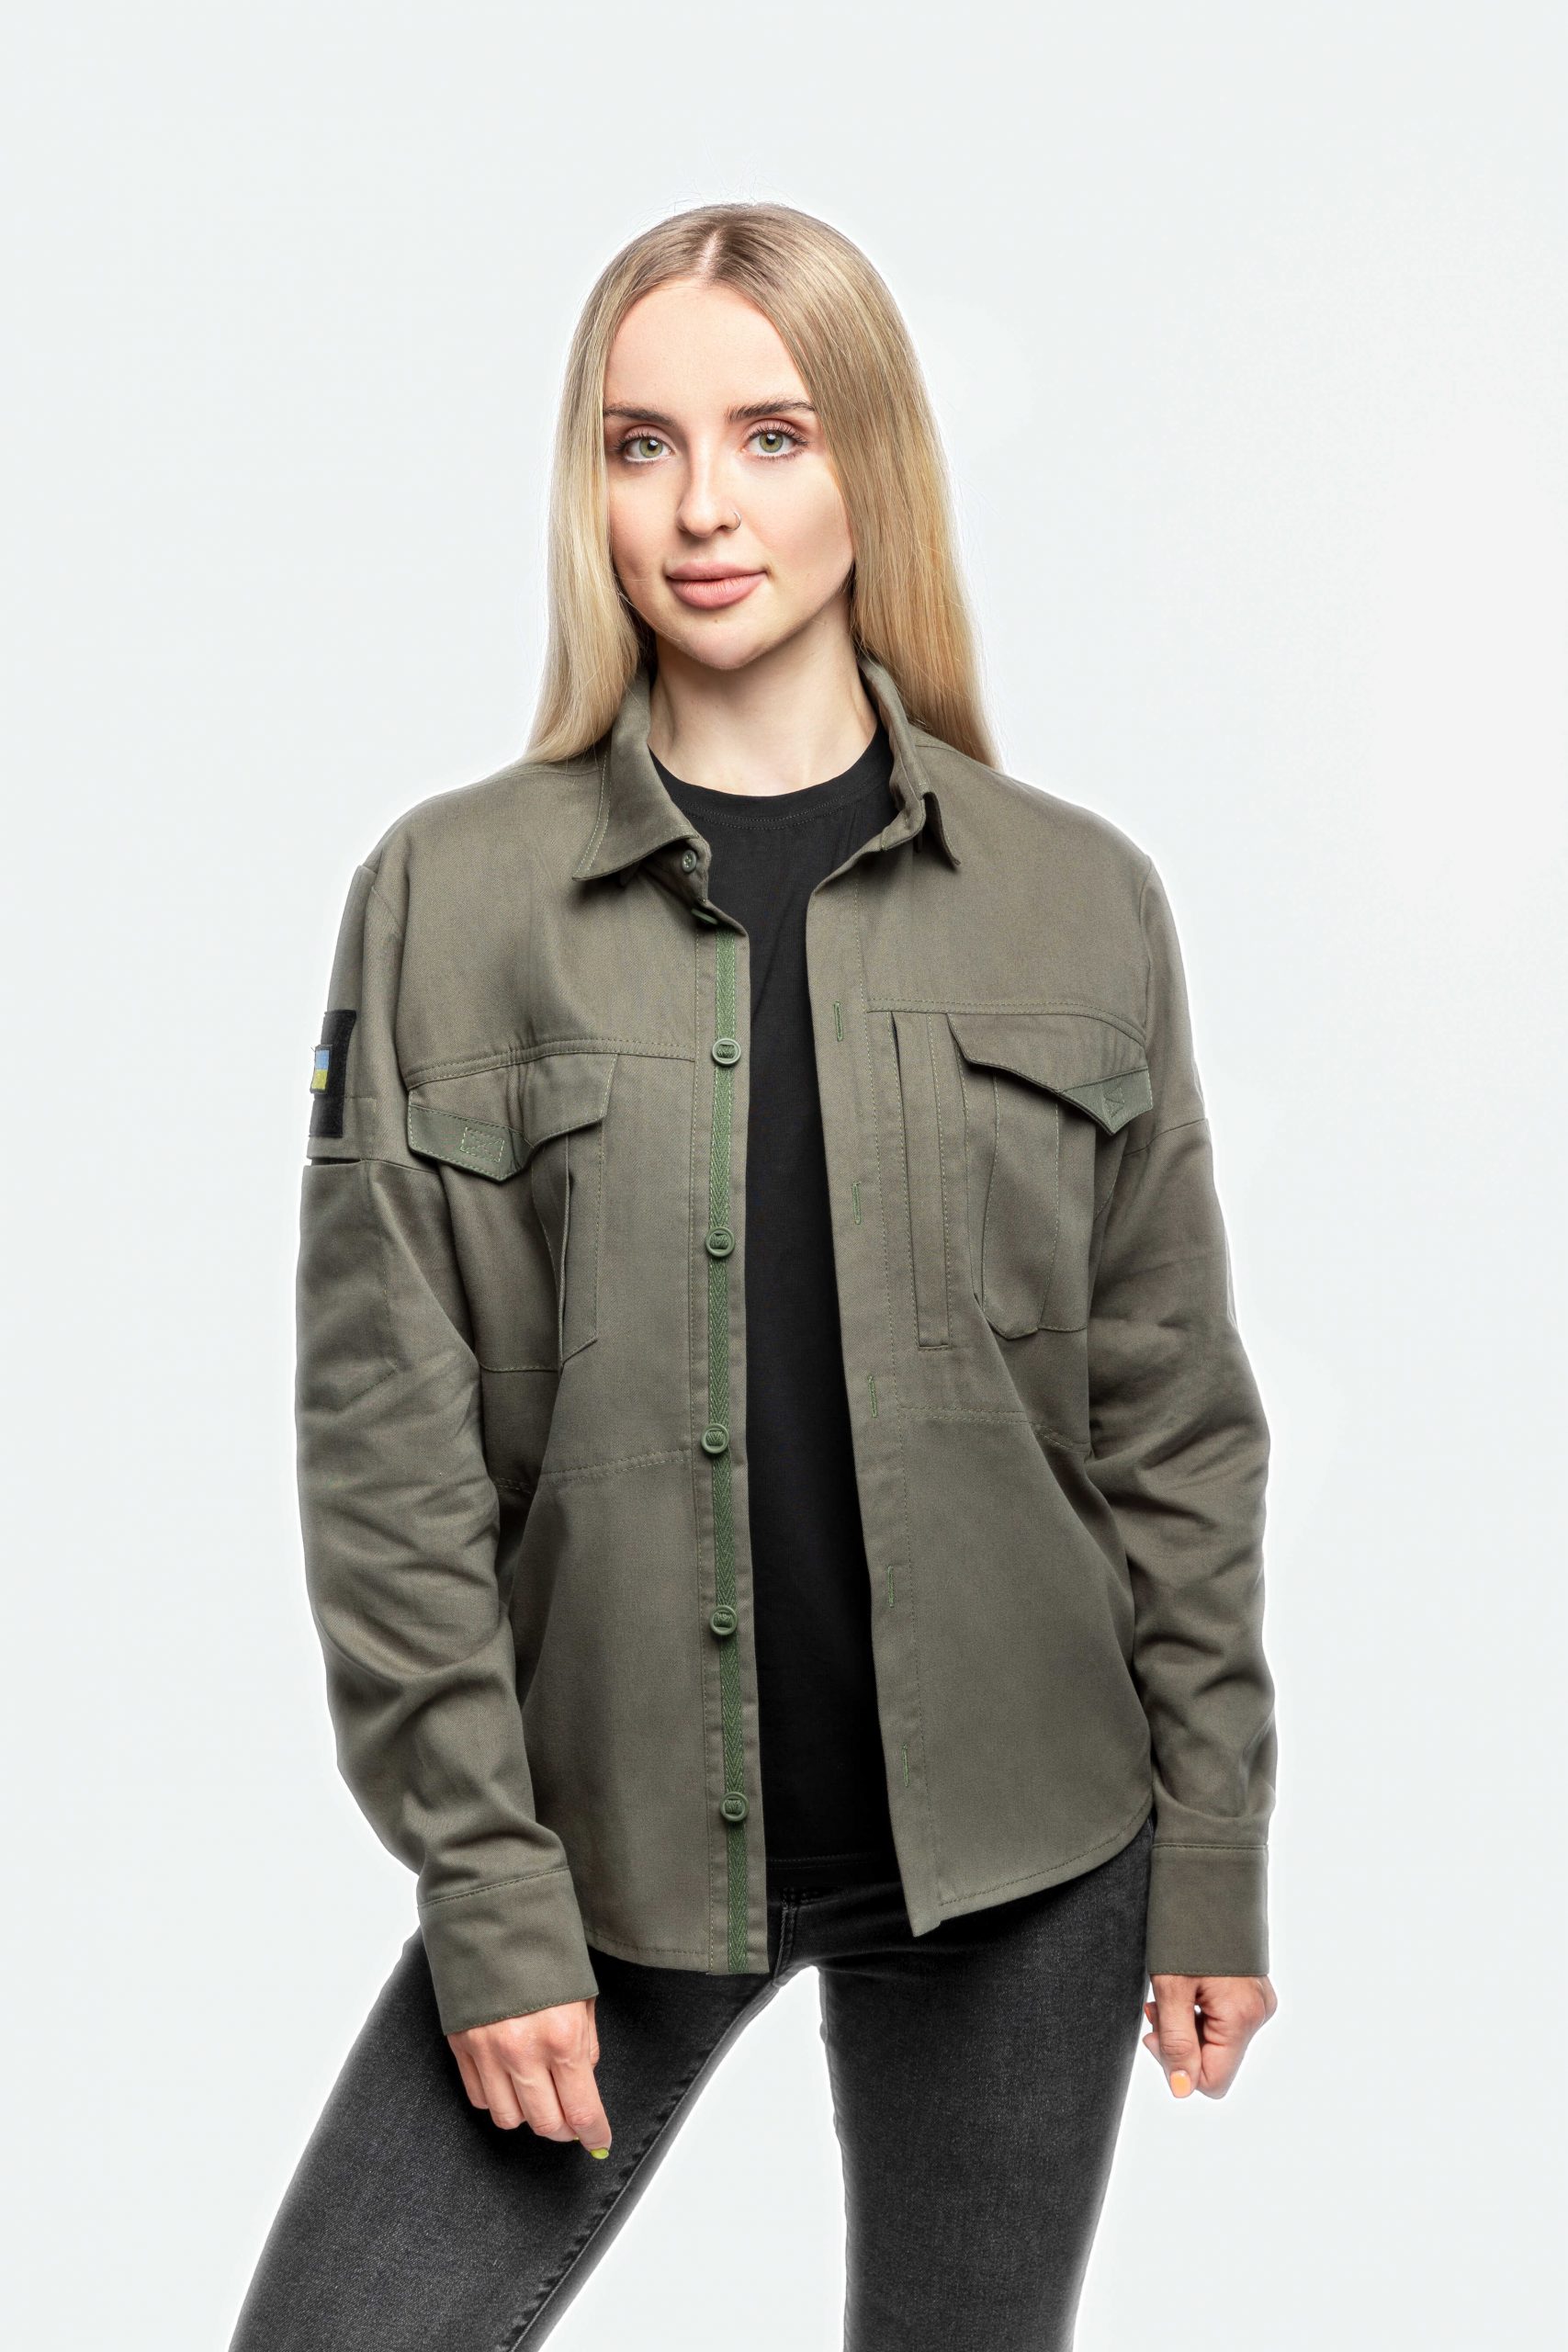 Women's Shirt Traveling. Color khaki. 
Size worn by the model: S.